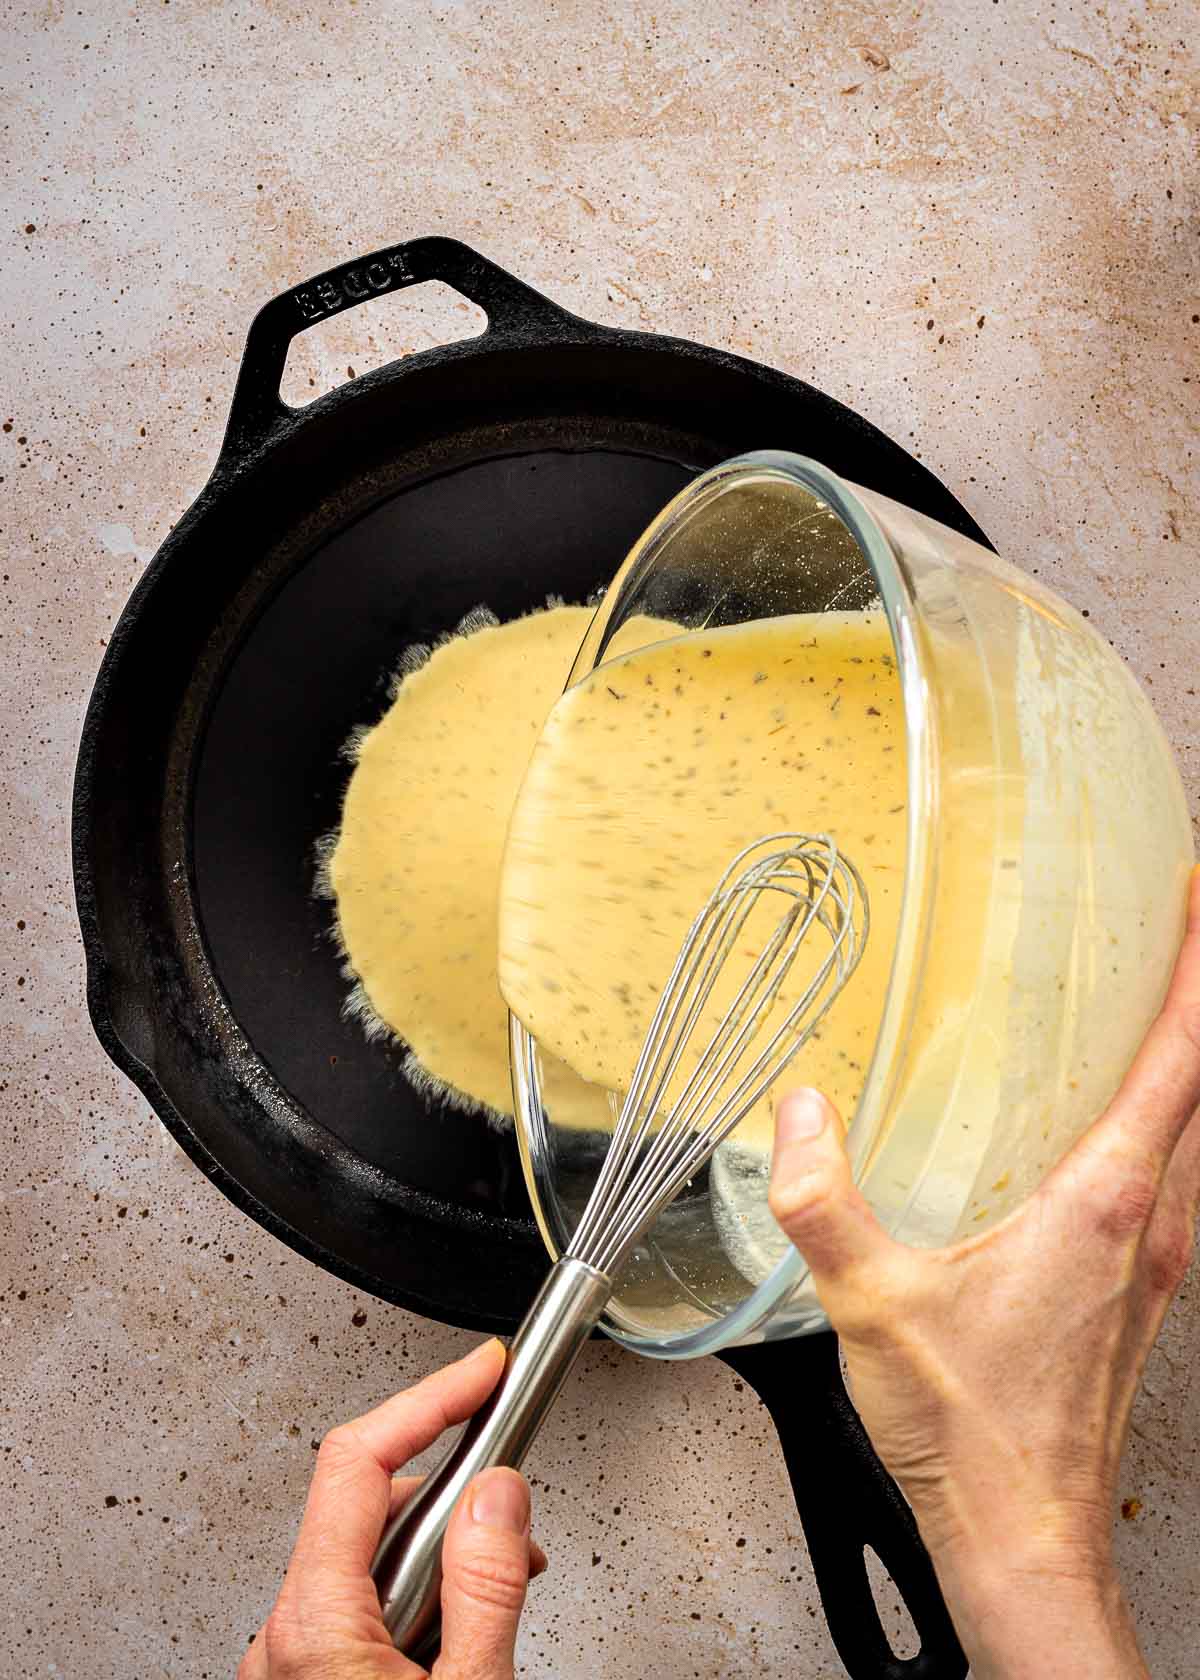 Chickpea pizza batter being poured into hot cast iron pan.